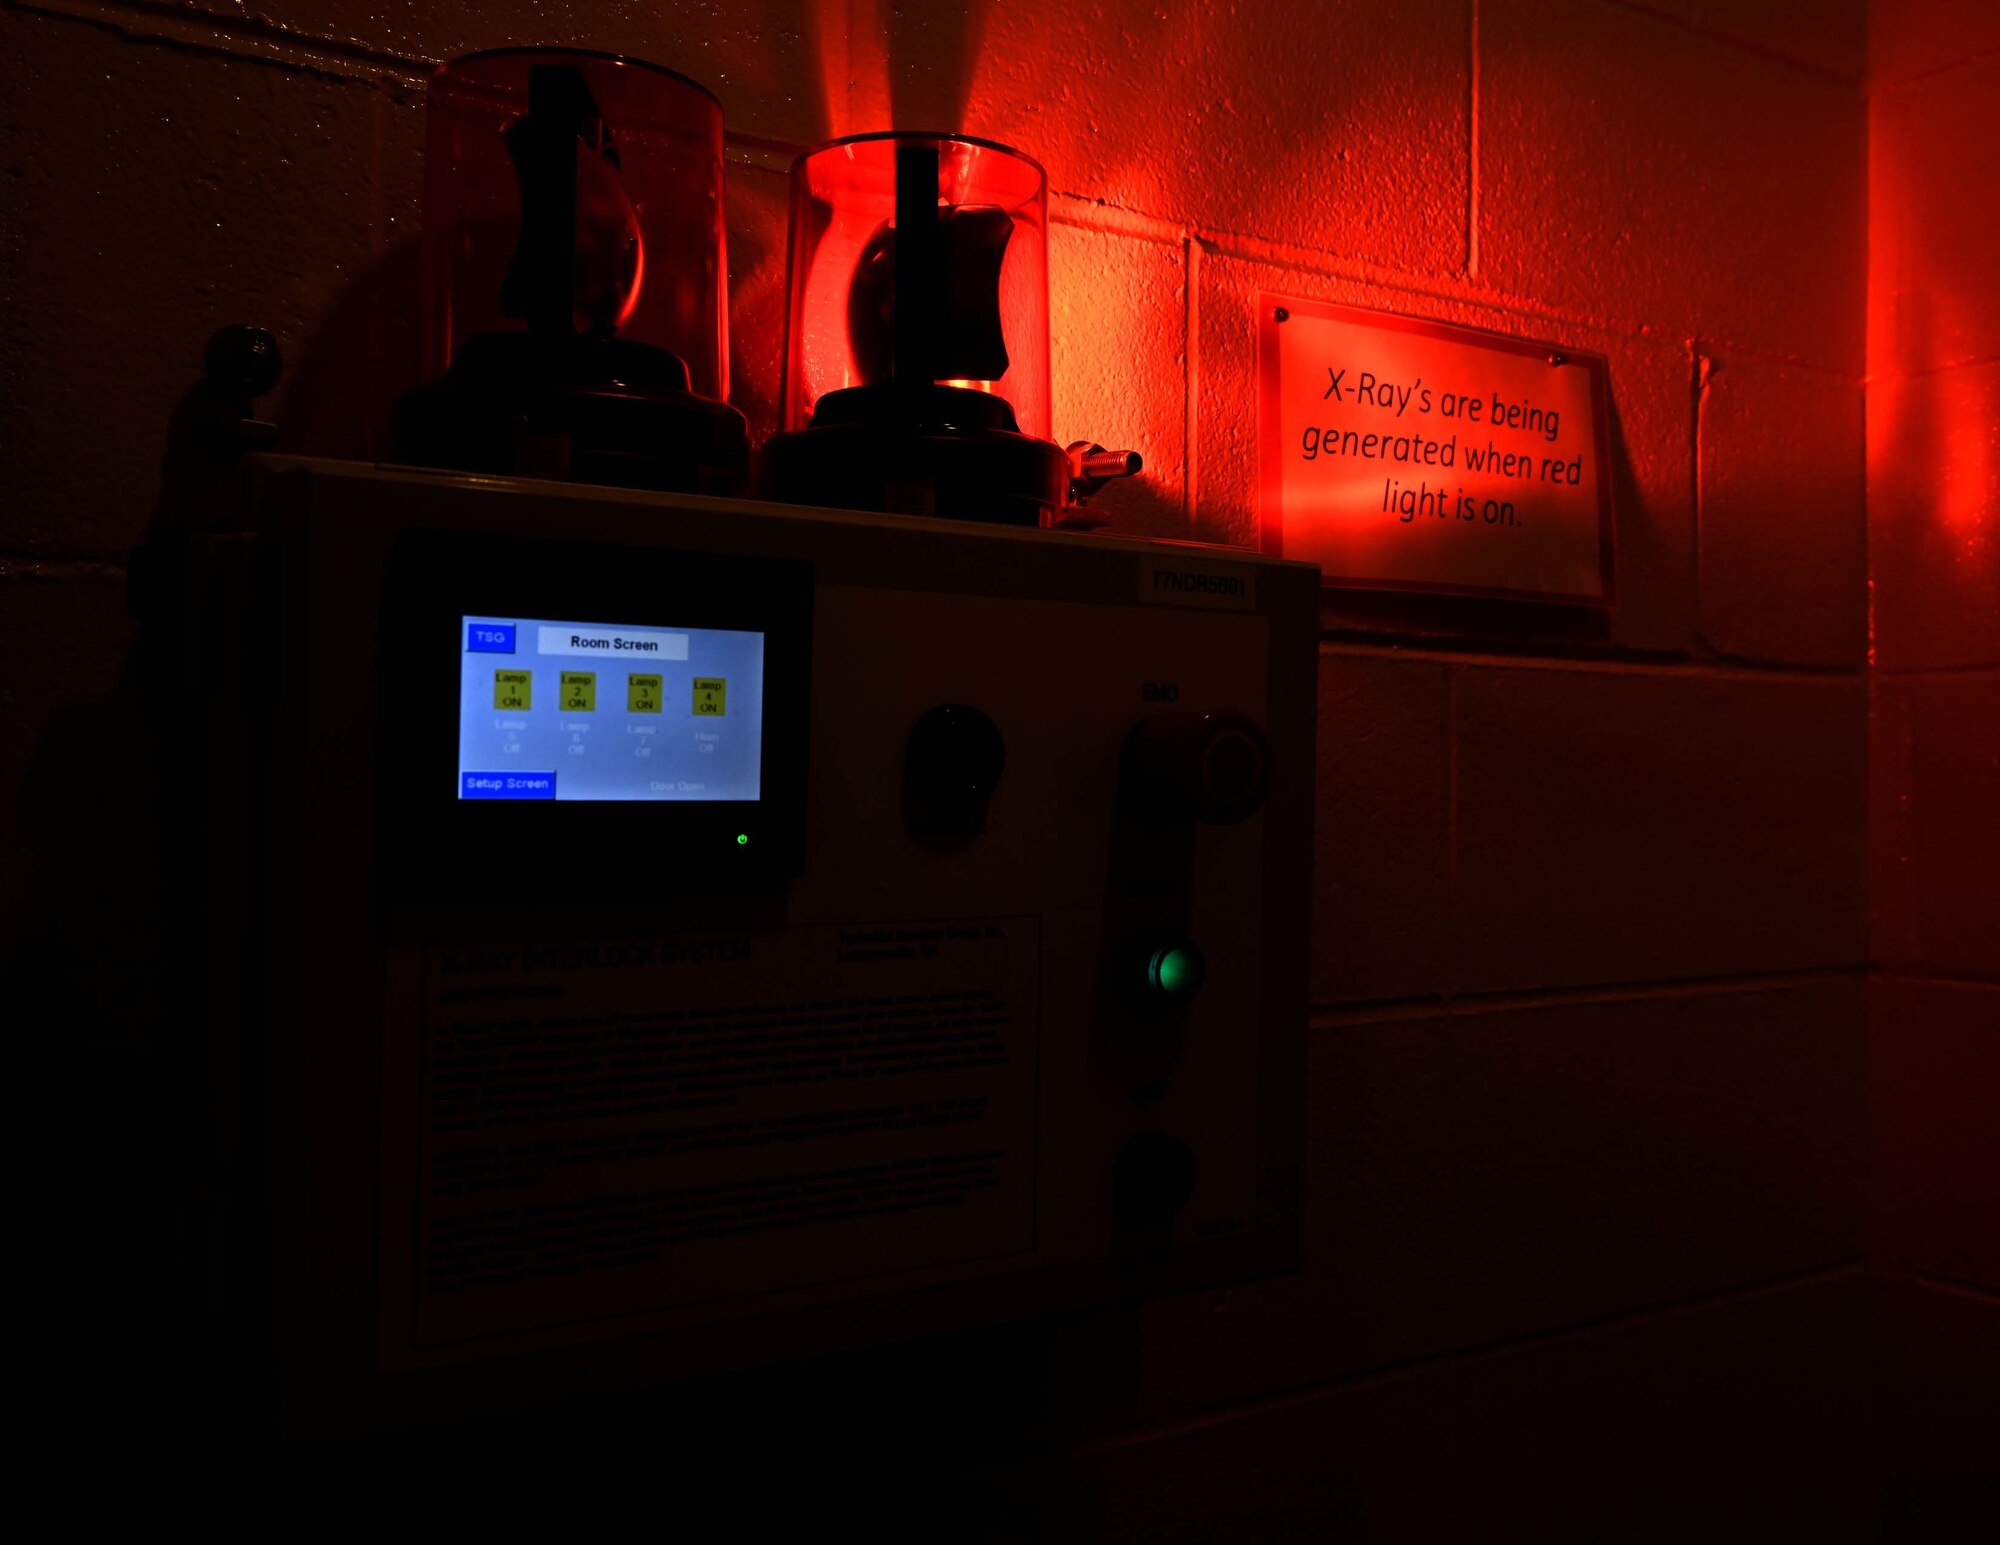 A red light oscillates while a siren pierces the ears of individuals in the surrounding area to ensure no one is too close when the x-ray imaging system is in use